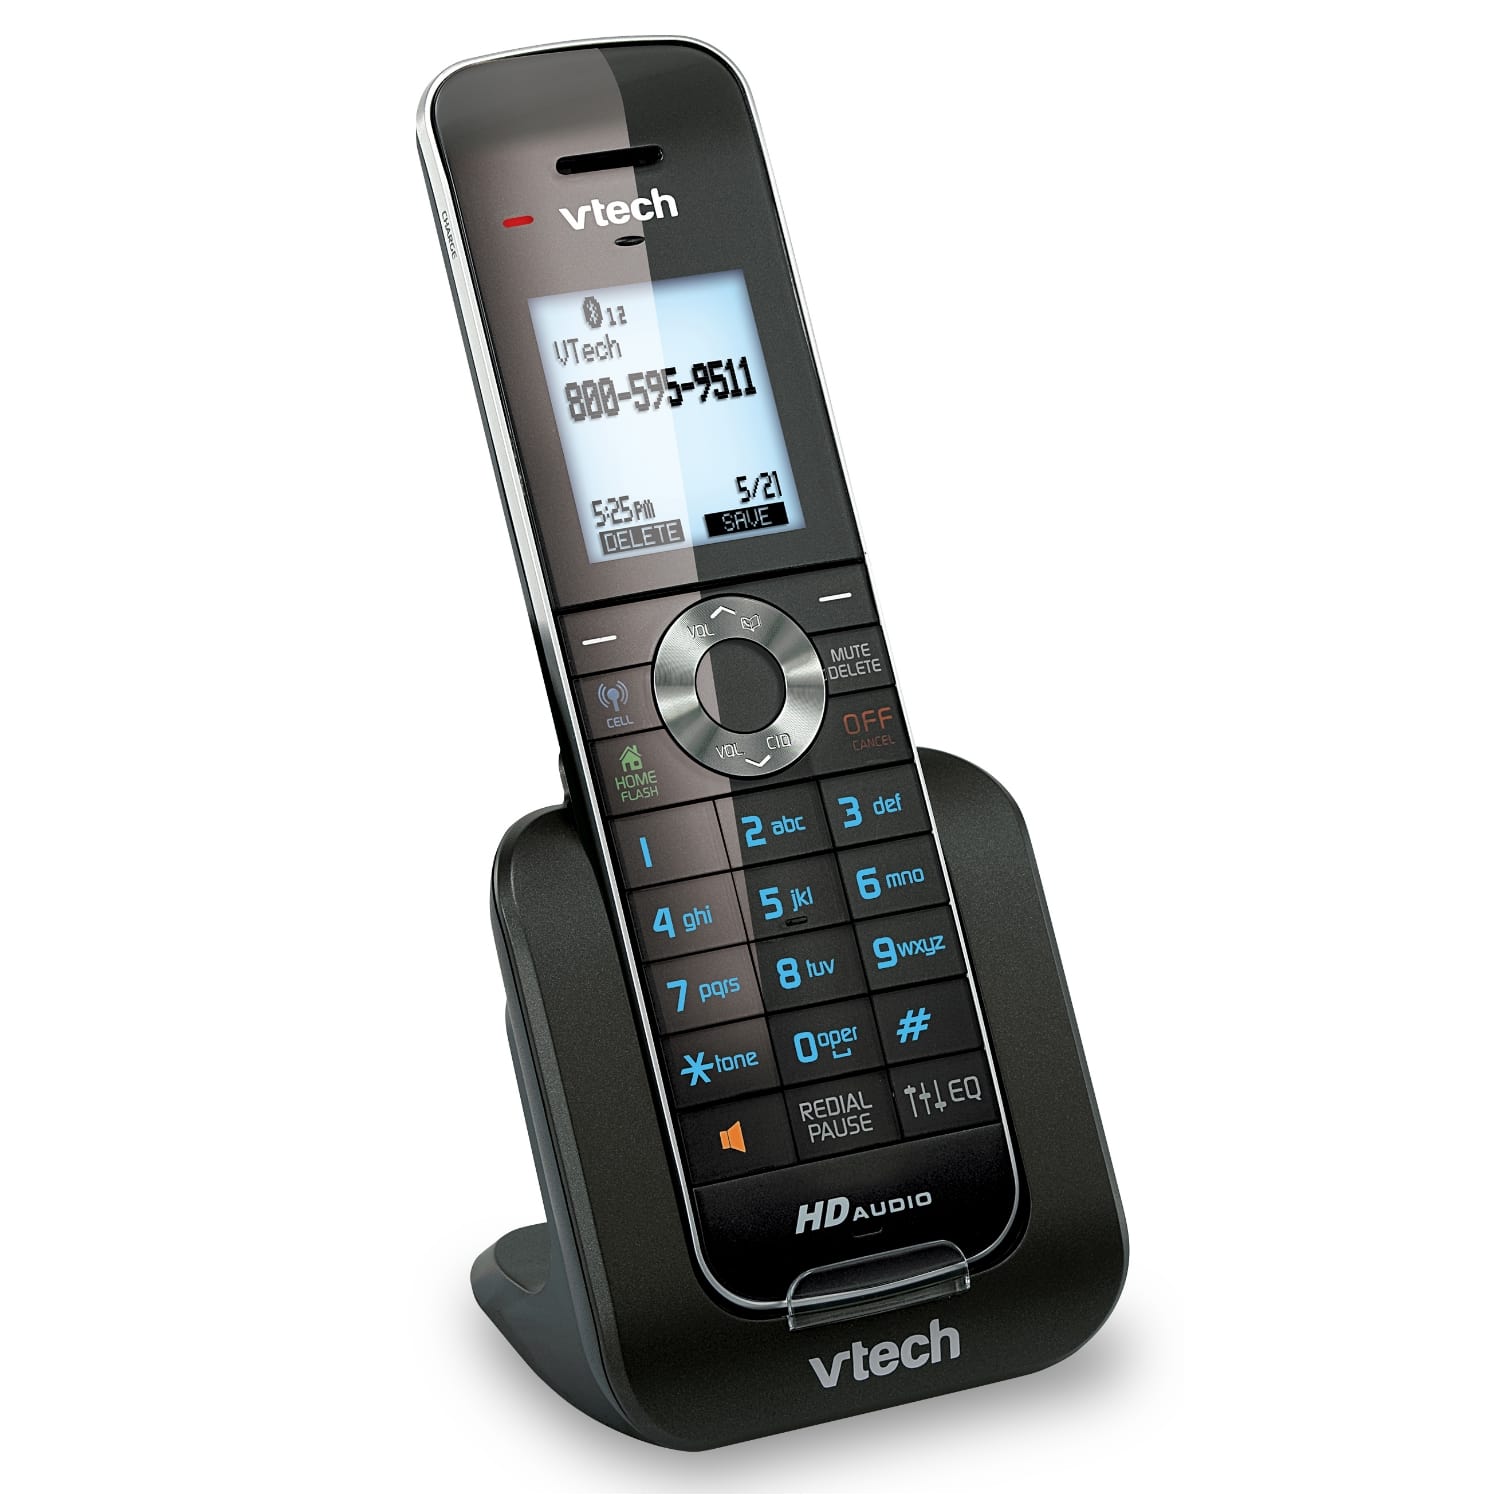 7 Handset Connect to Cell™ Answering System with Caller ID/Call Waiting - view 7